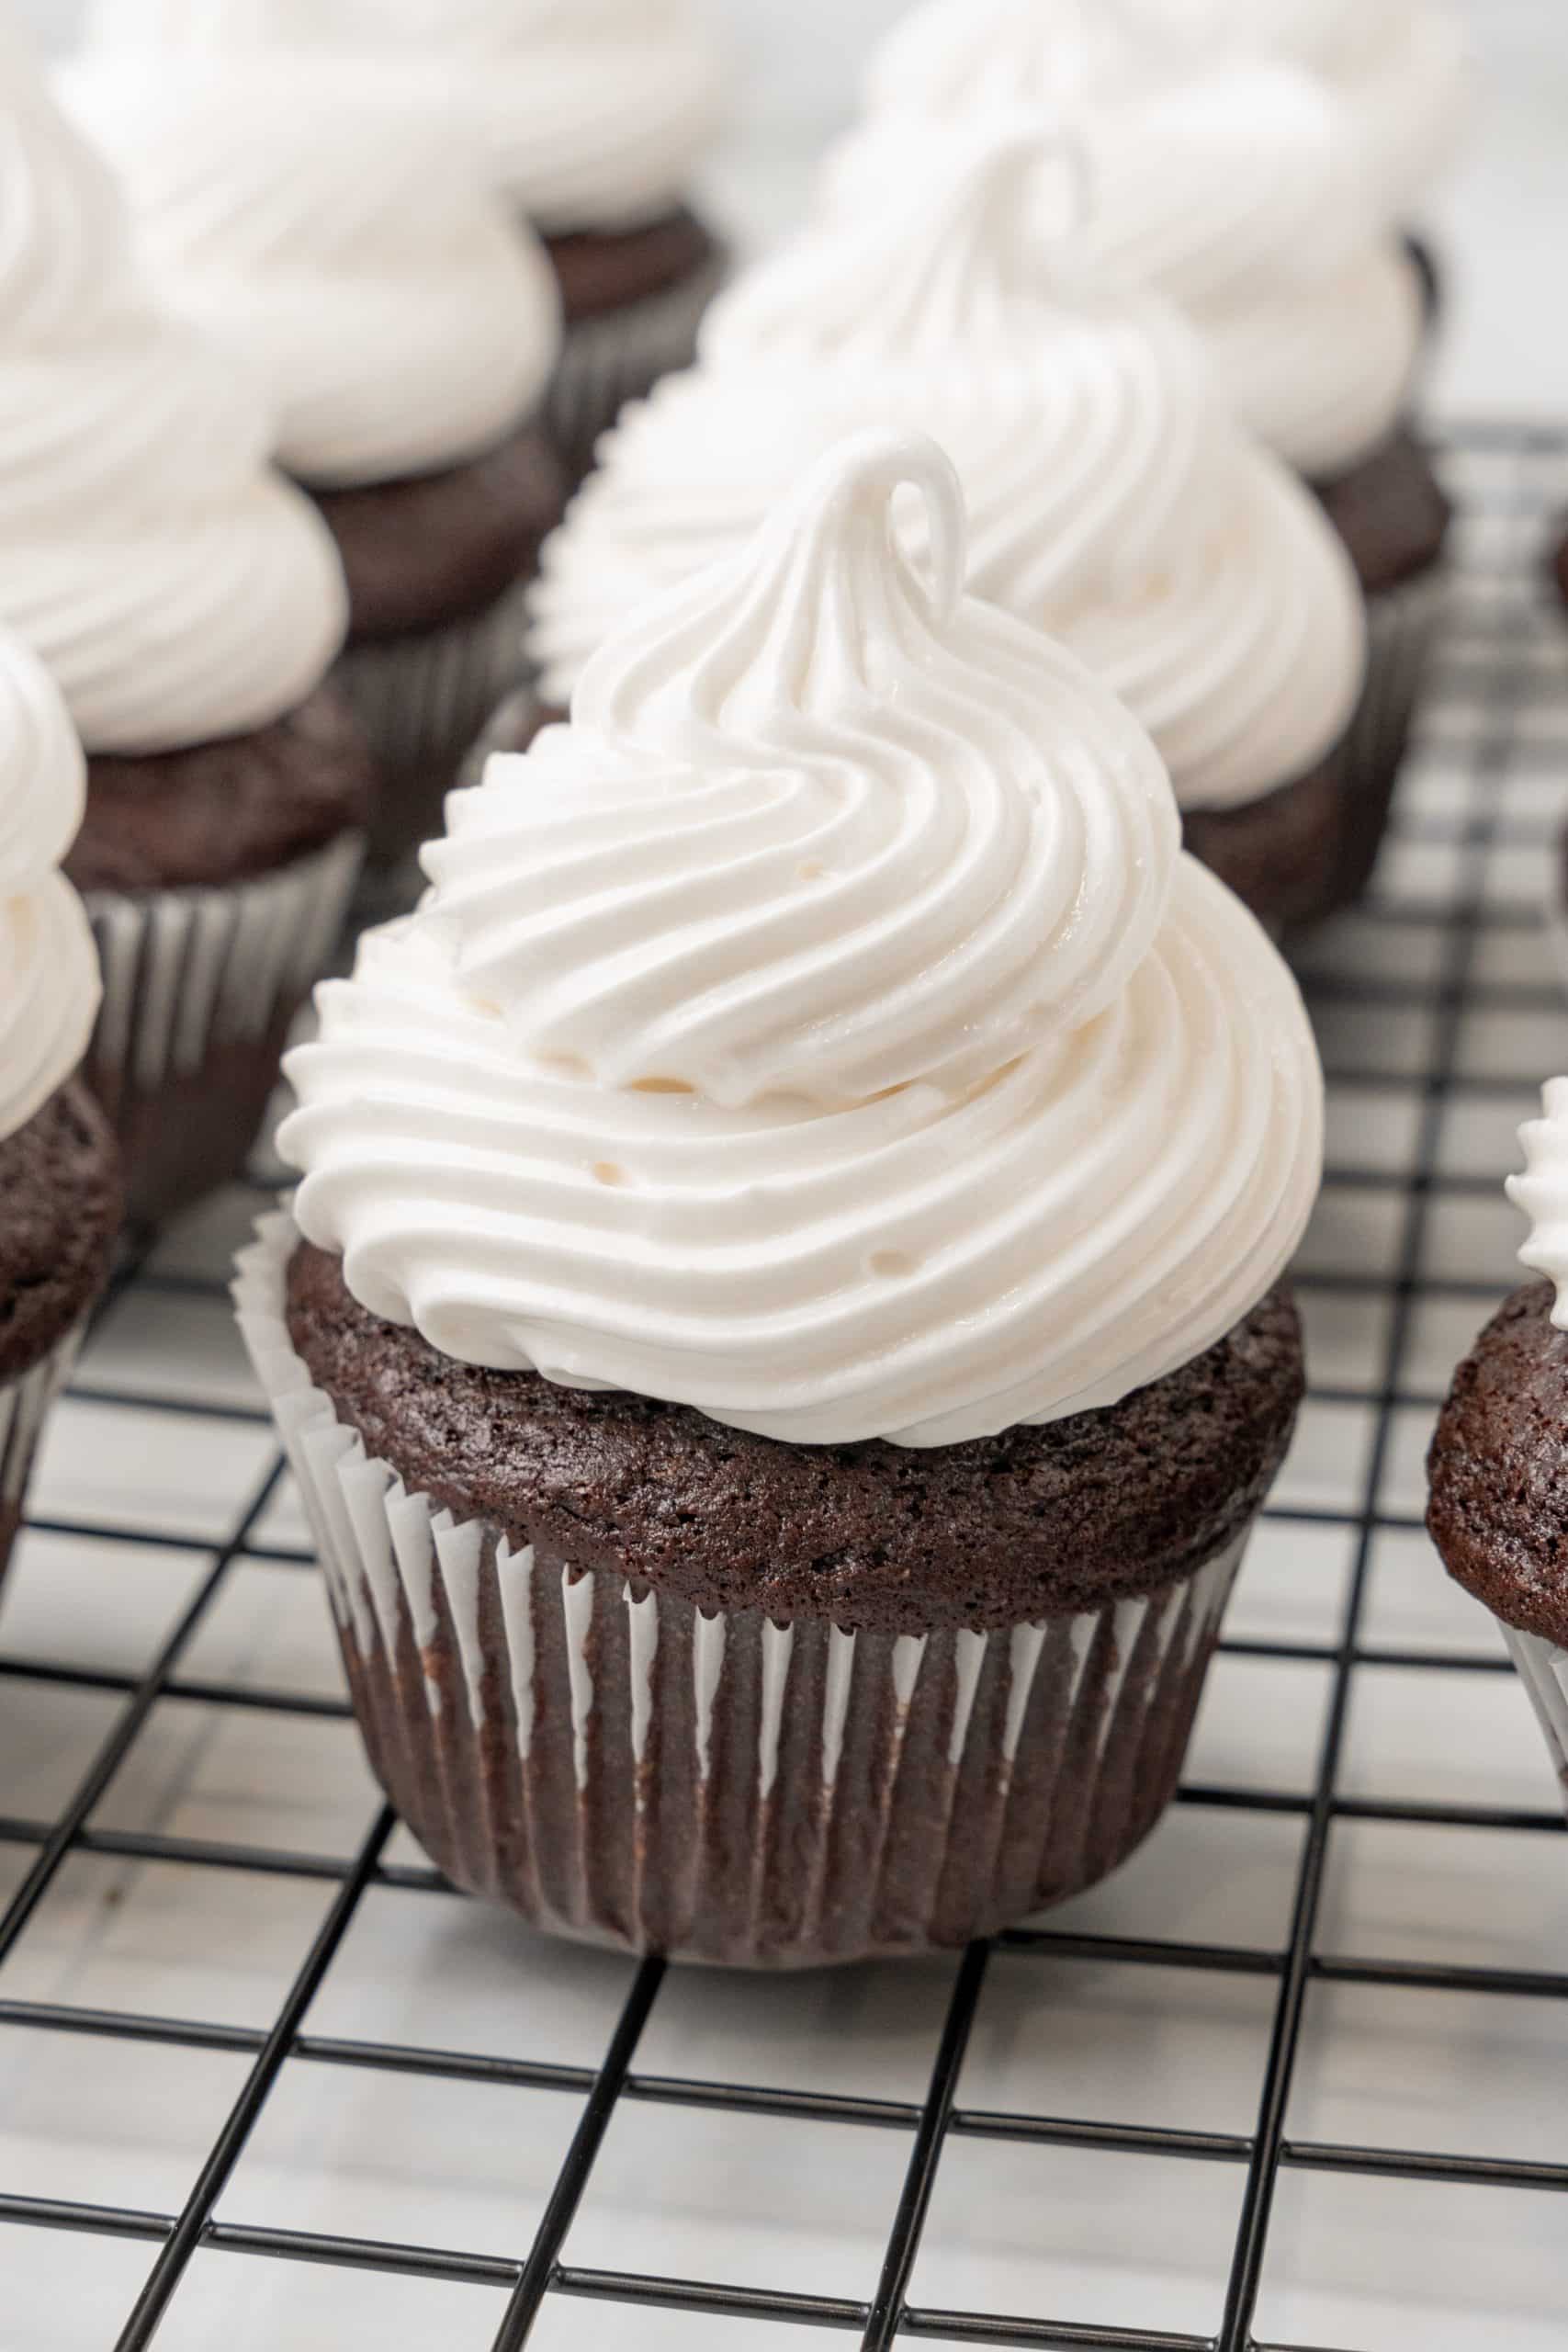 marshmallow frosting topped chocolate cupcakes on a metal cooling rack